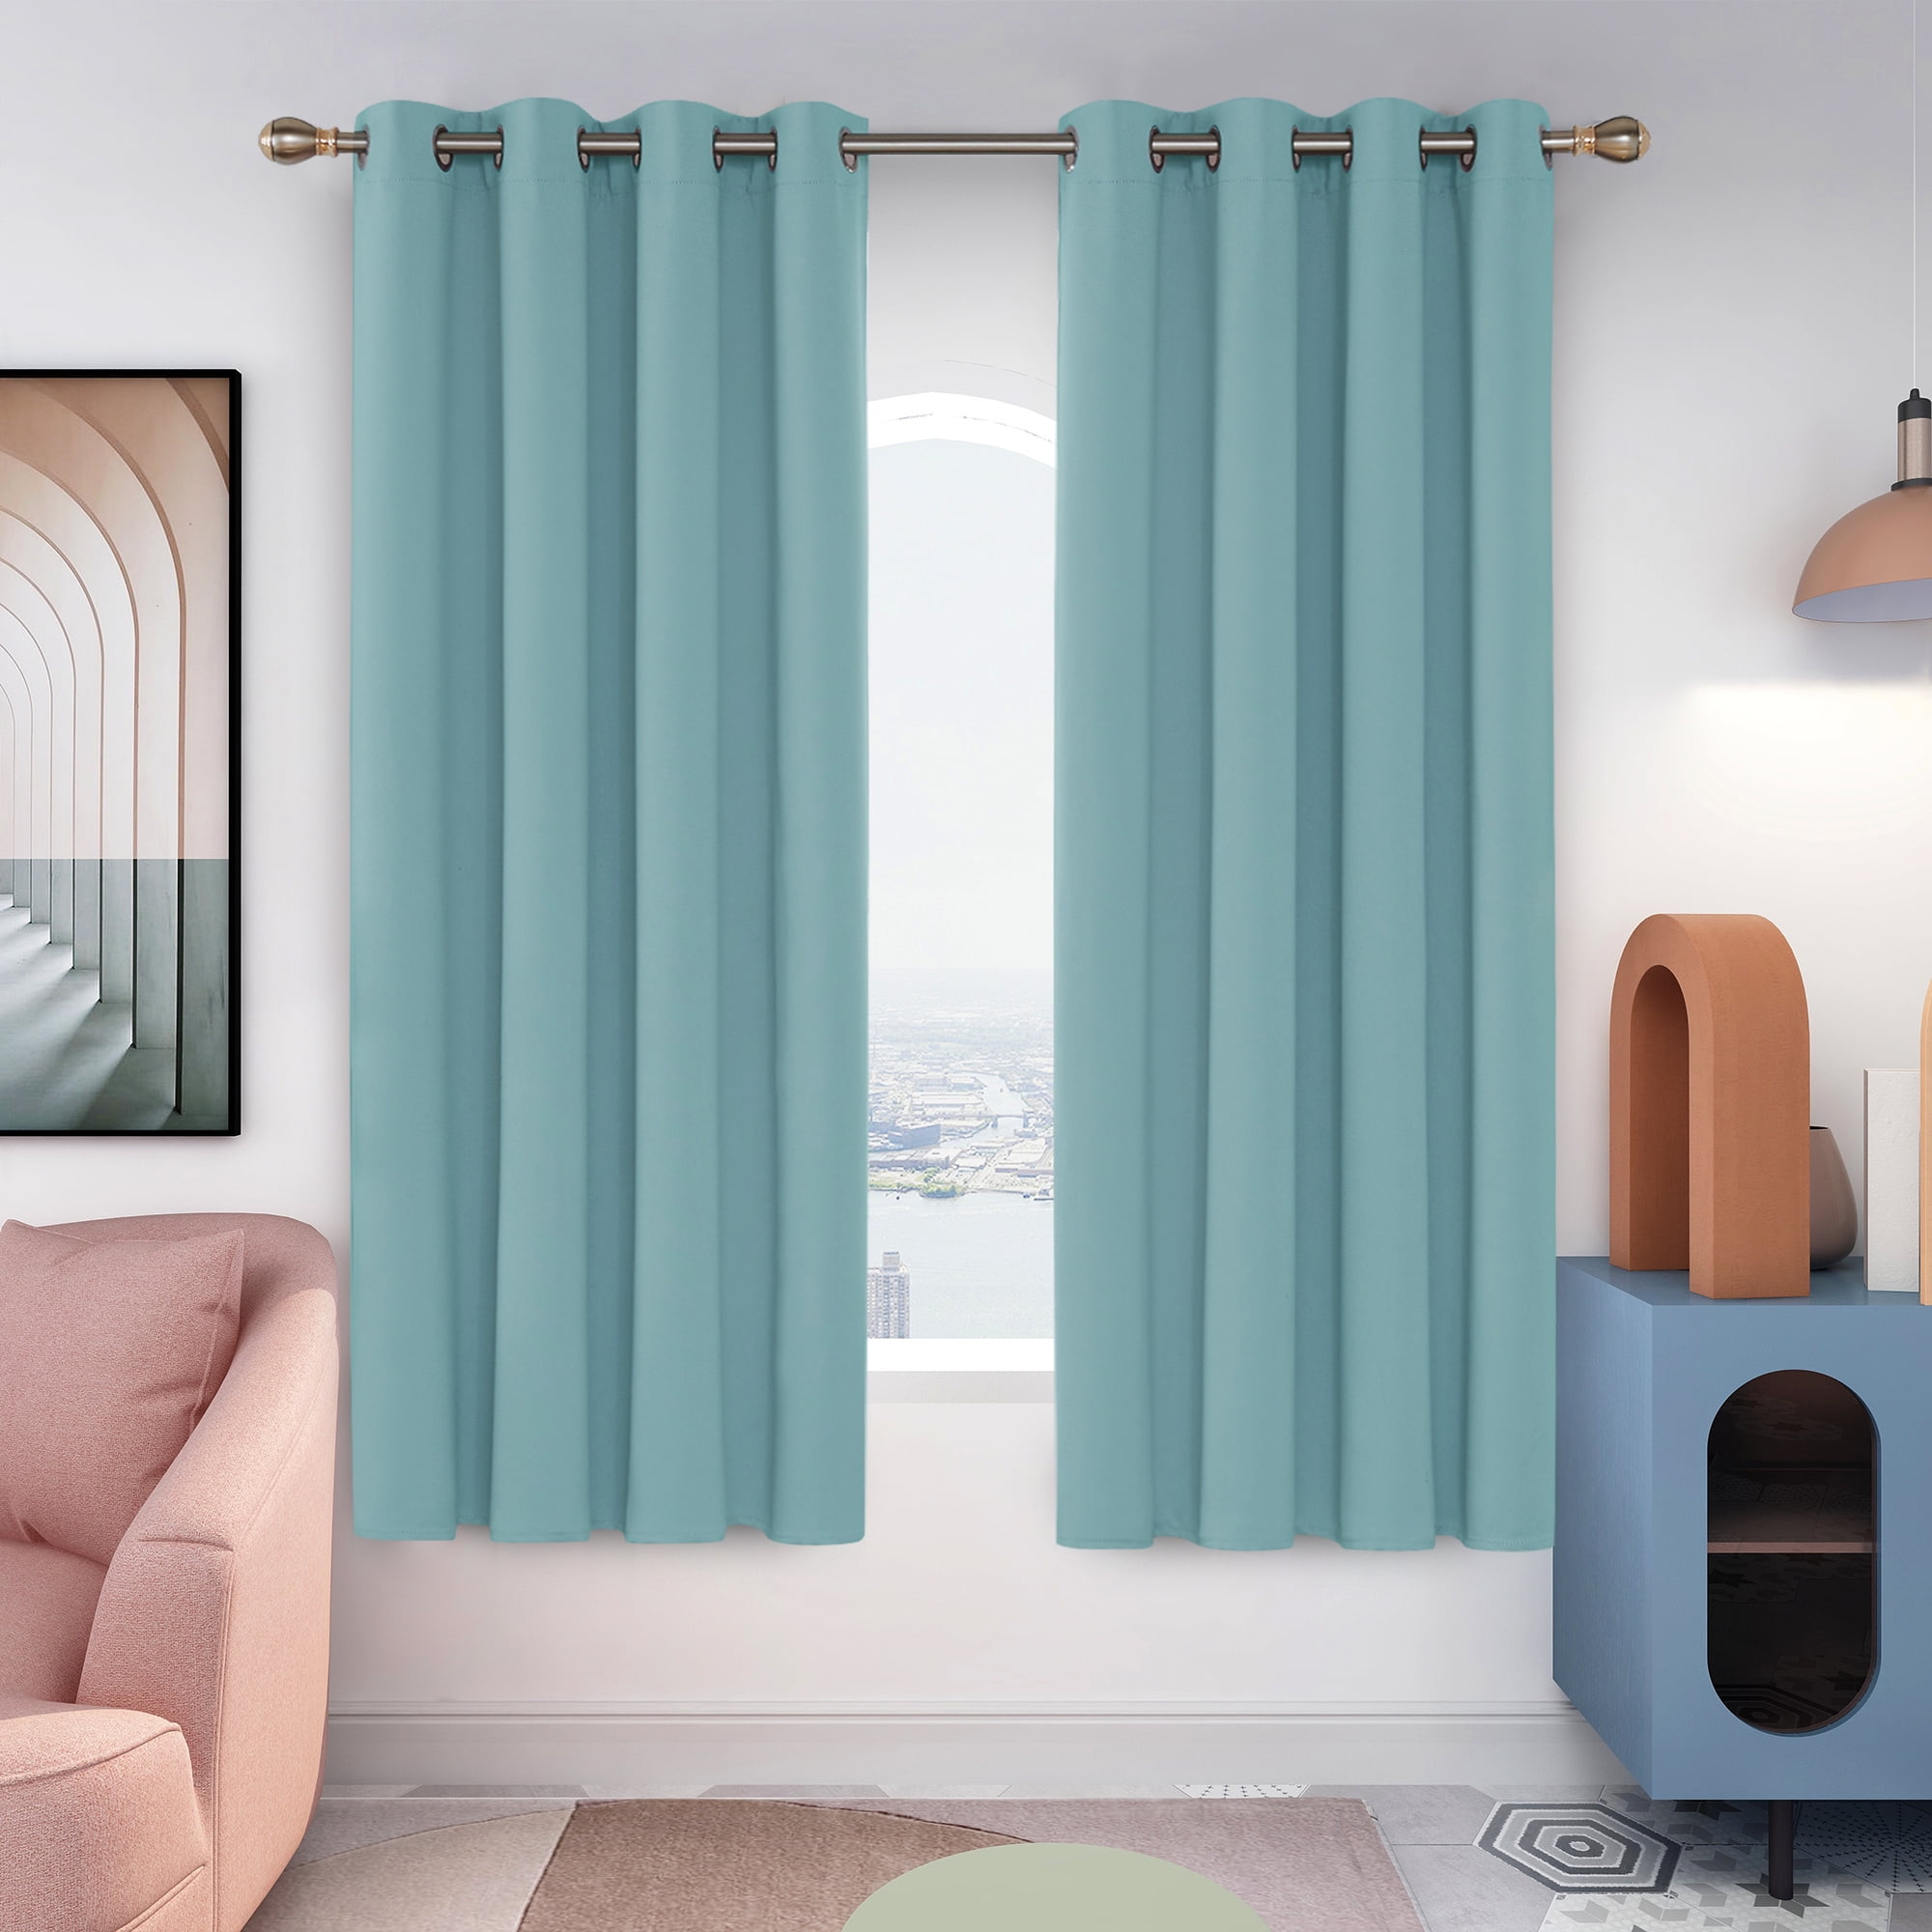 Deconovo Black Out Curtains Set of 2, 63 inches long - Grommet Room Darkening Thermal Insulated Curtains for Living Room (52x63 inch, Teal, 2 Panels)